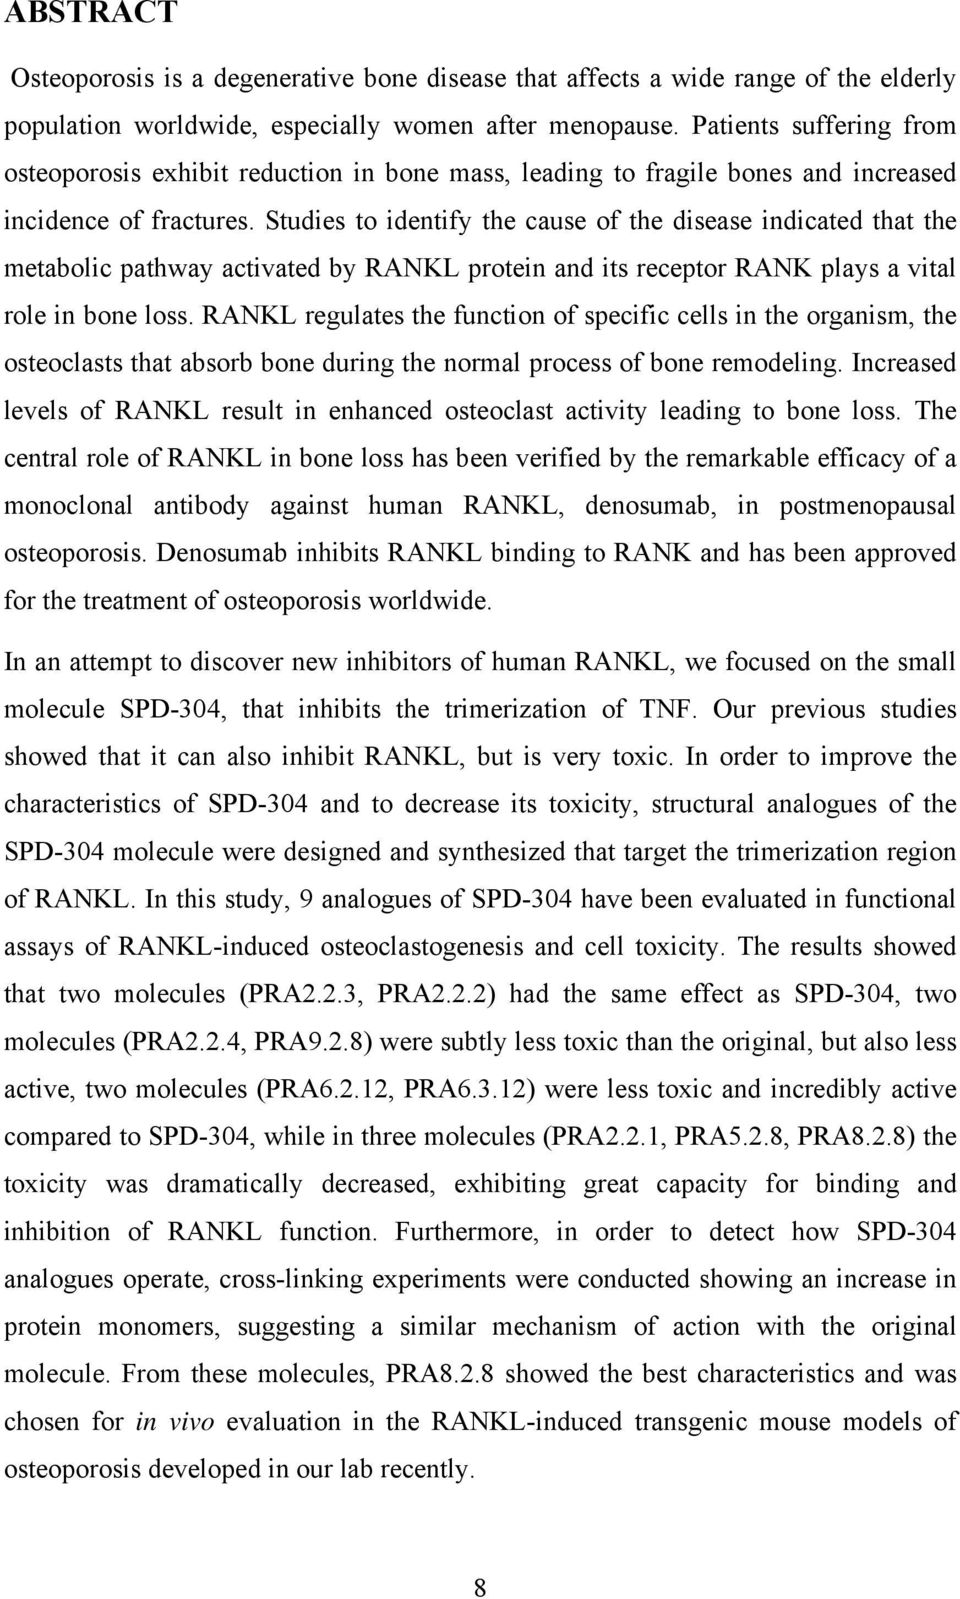 Studies to identify the cause of the disease indicated that the metabolic pathway activated by RANKL protein and its receptor RANK plays a vital role in bone loss.